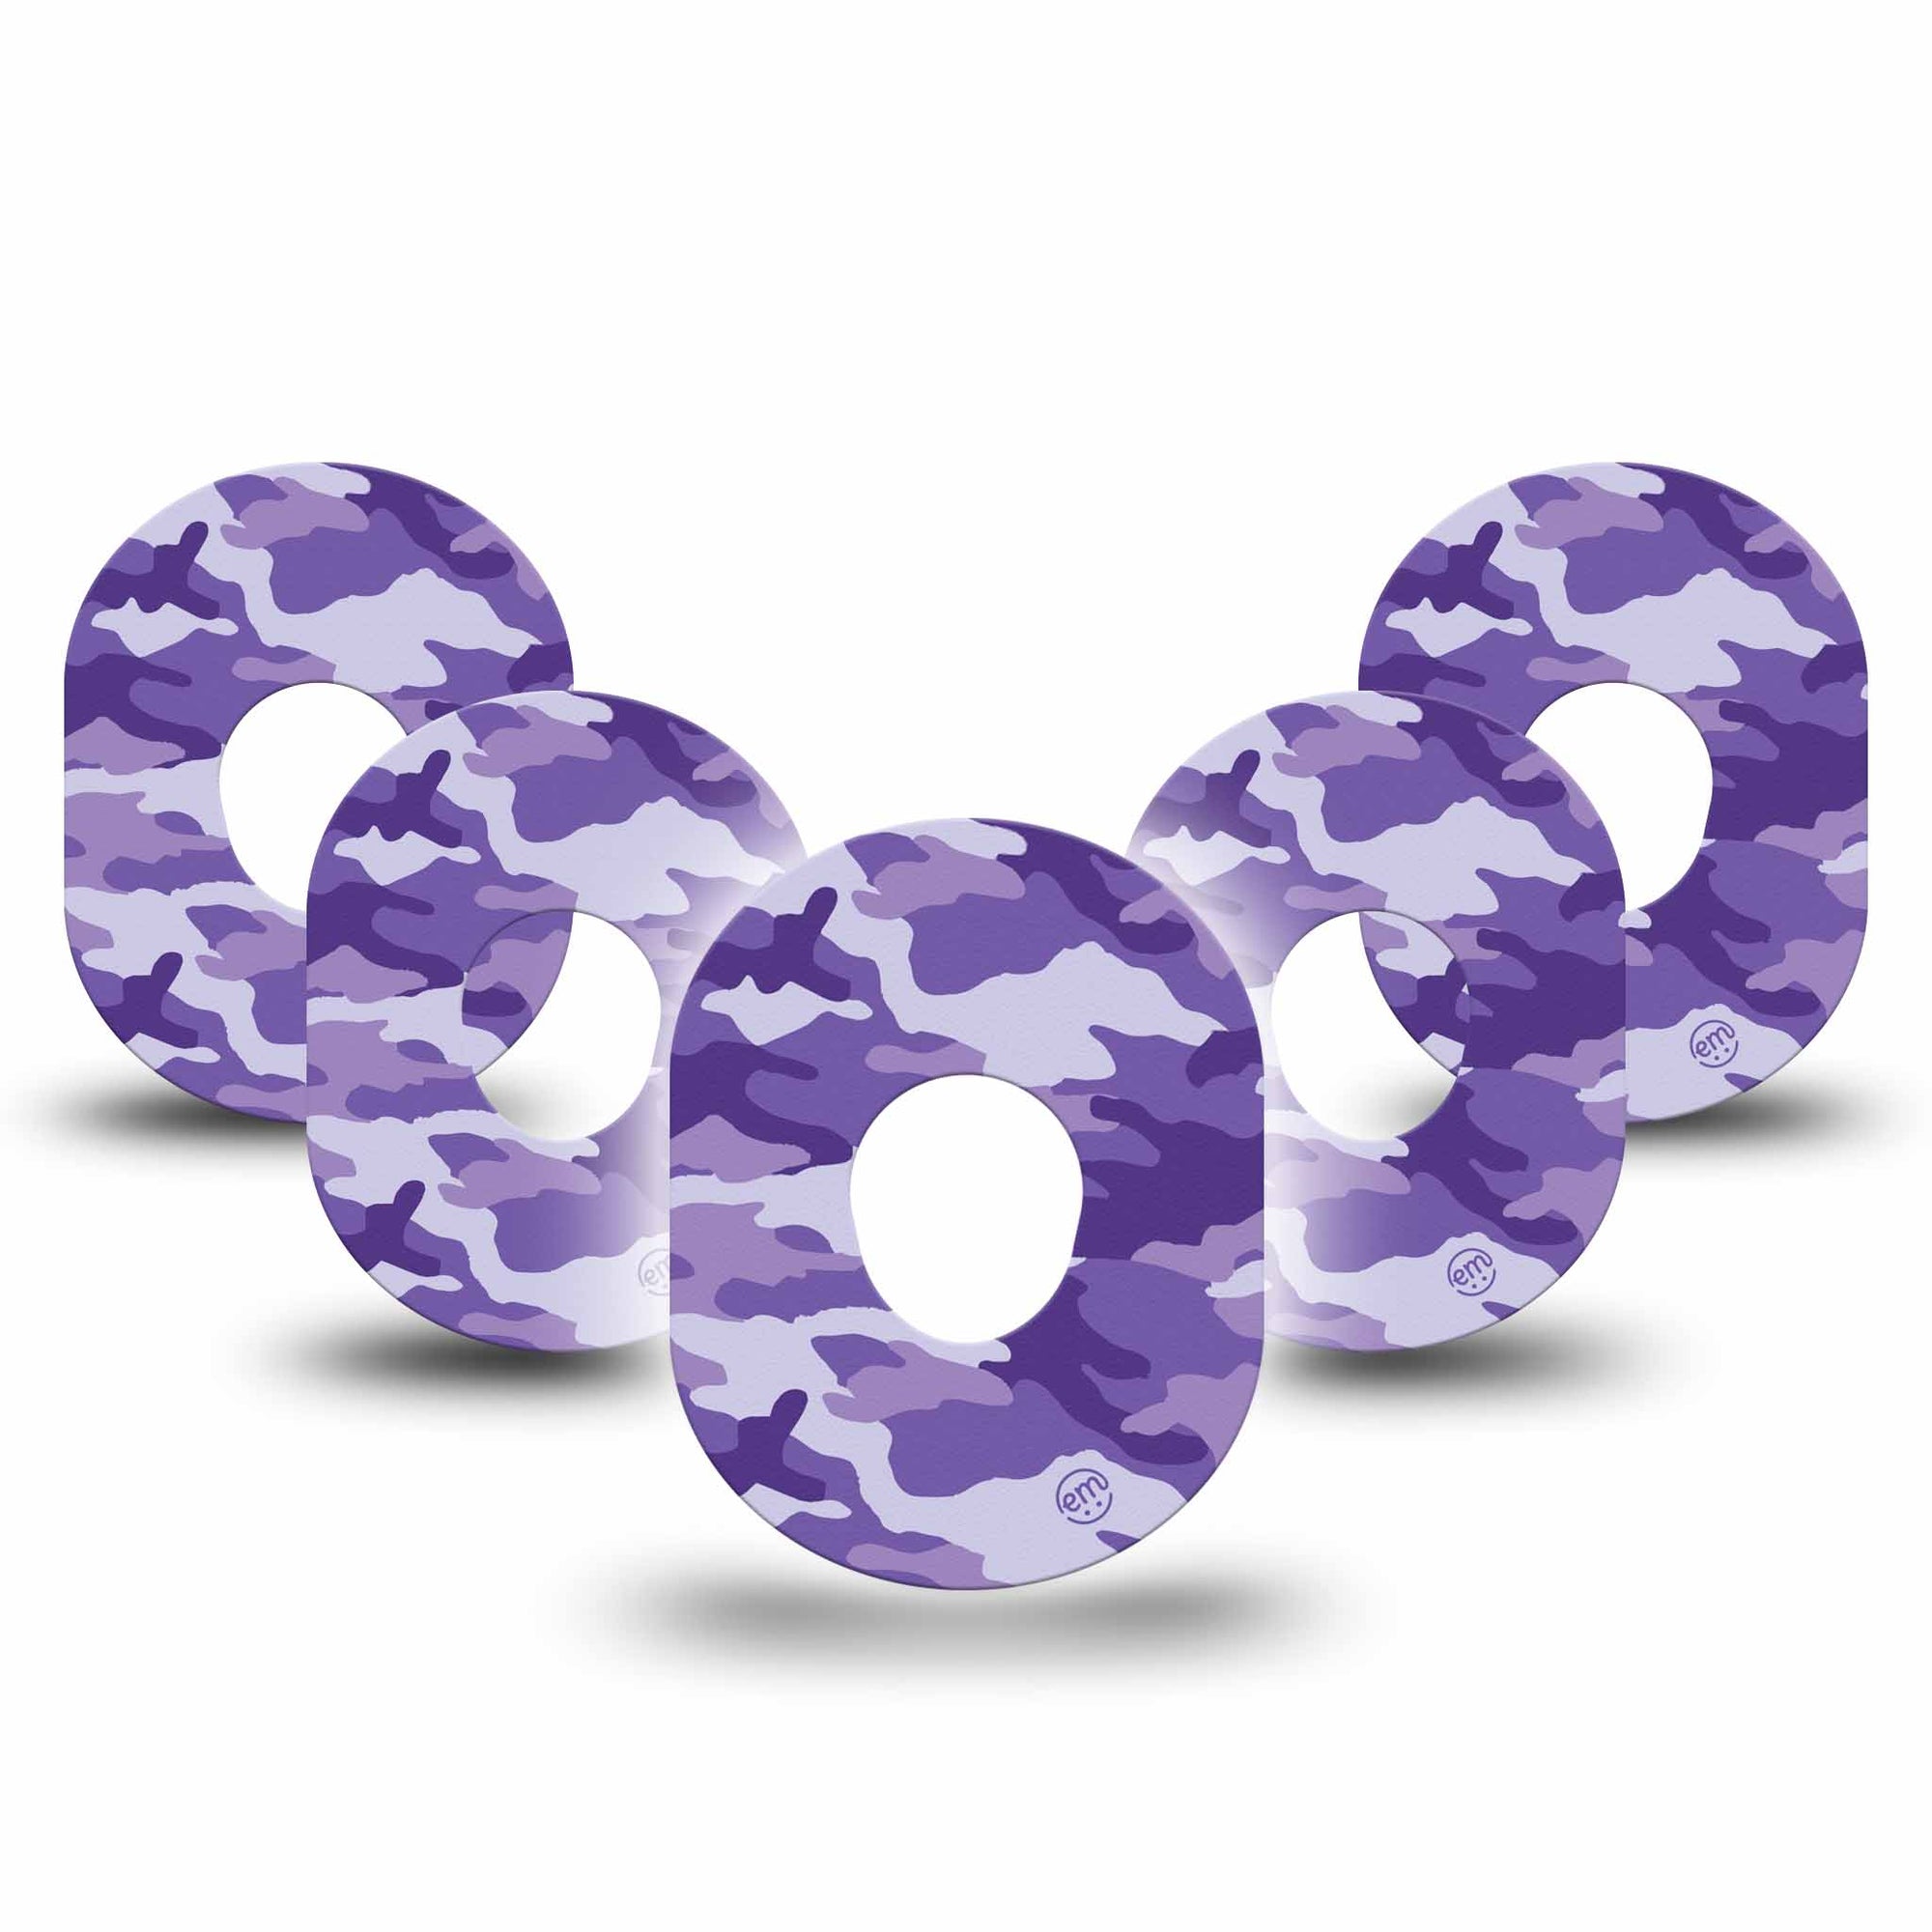 ExpressionMed Pruple Camo Dexcom G7 Tape, 5-Pack, Purple Disguise Themed, CGM Patch Design